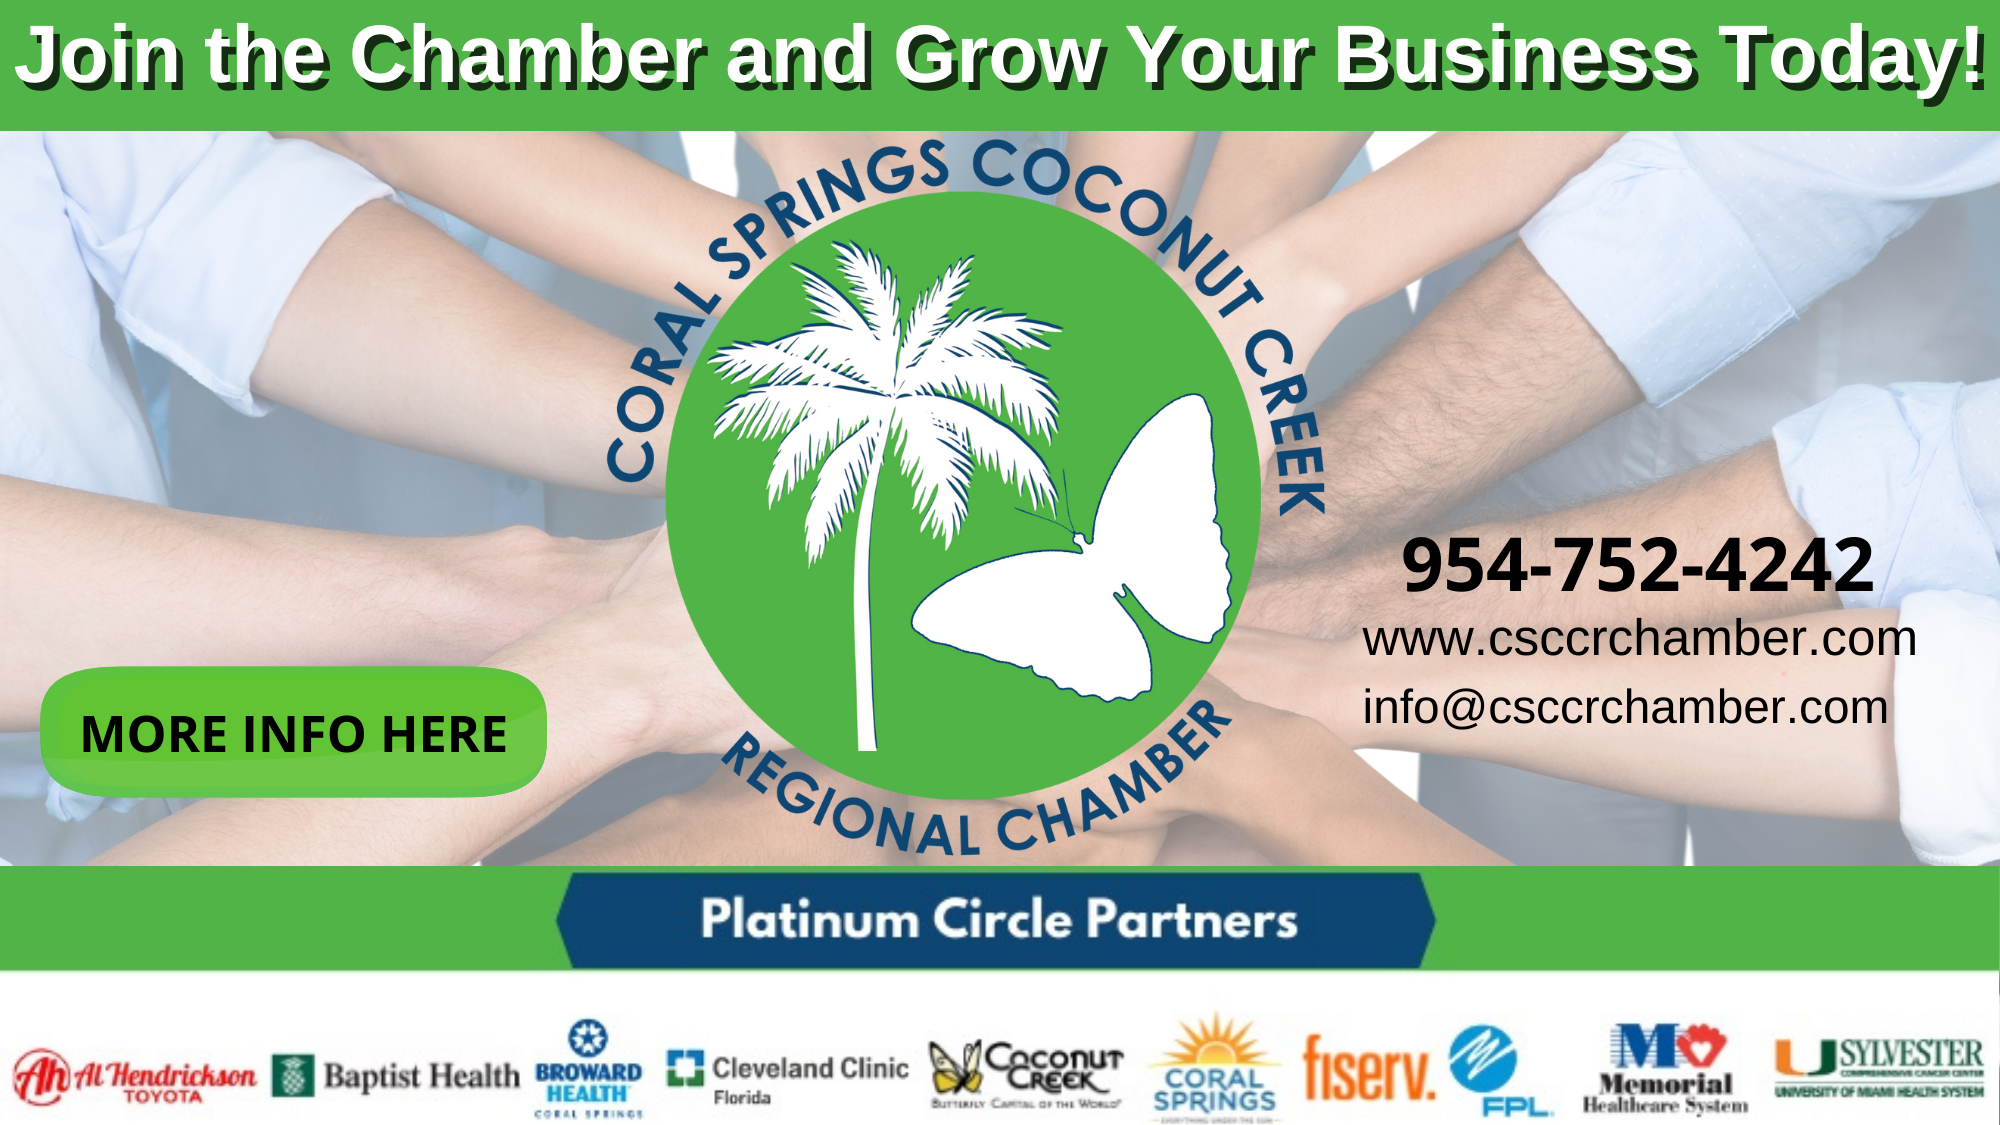 Join the Chamber! business card CST